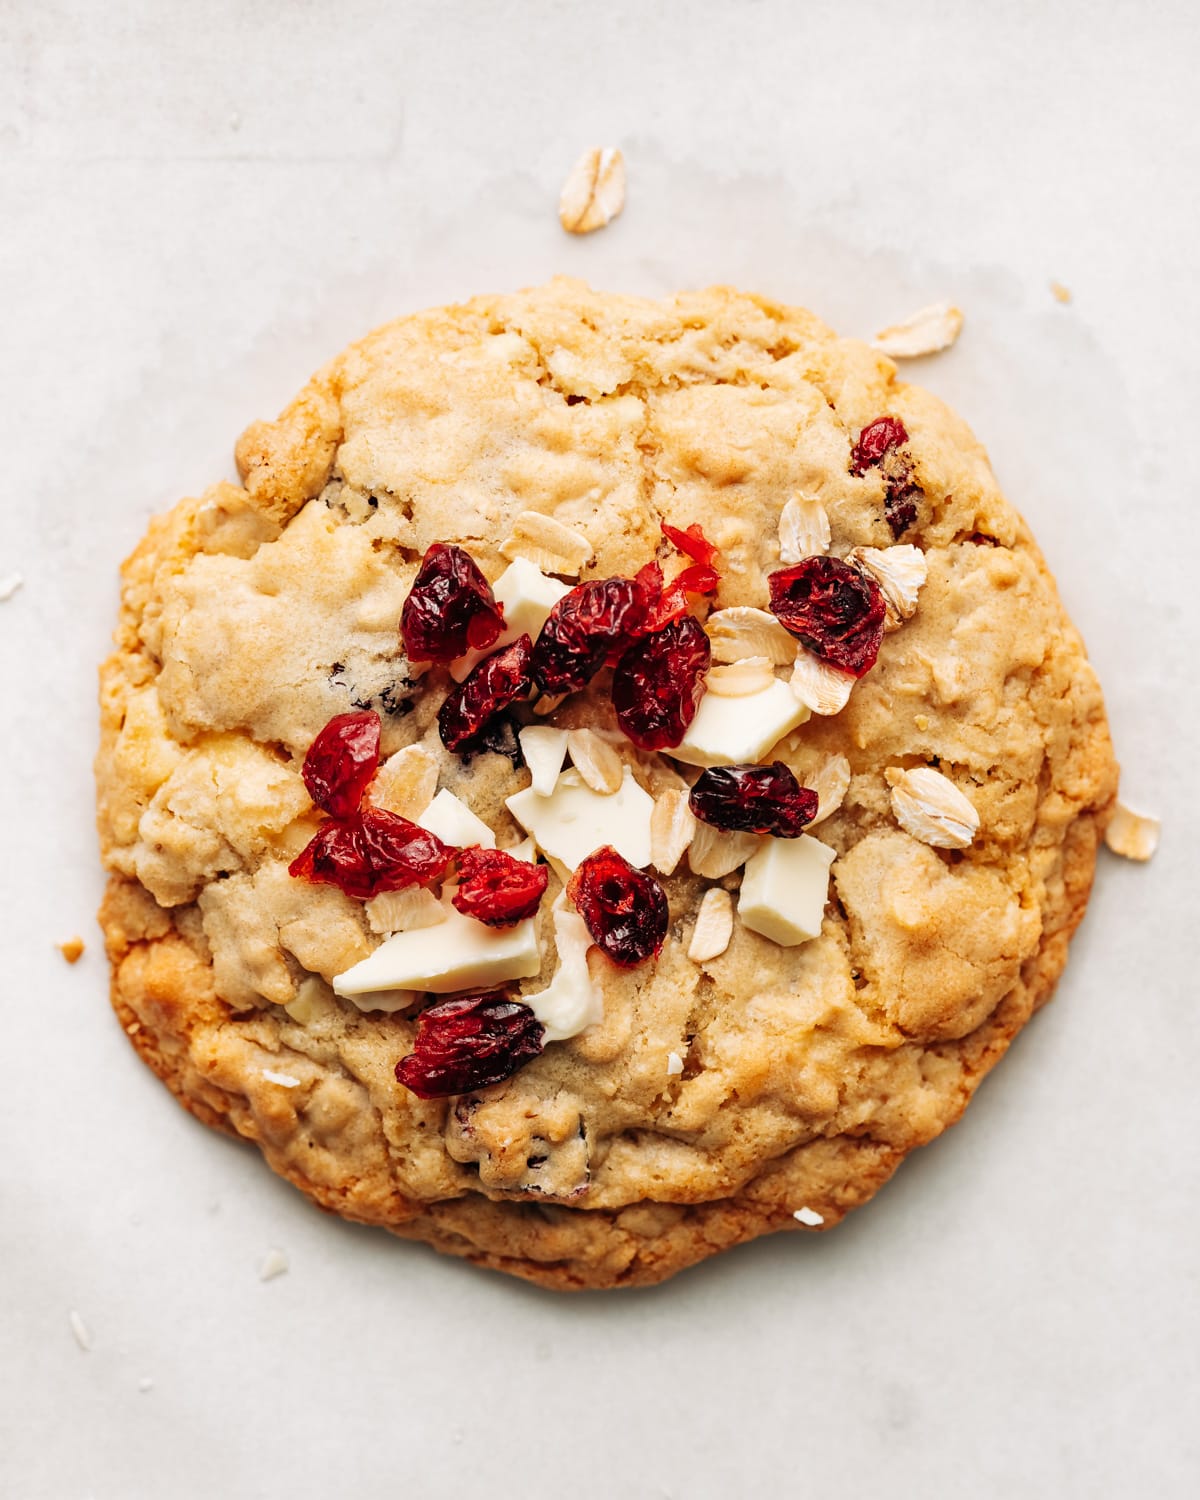 white chocolate cranberry oatmeal cookie on parchment paper.